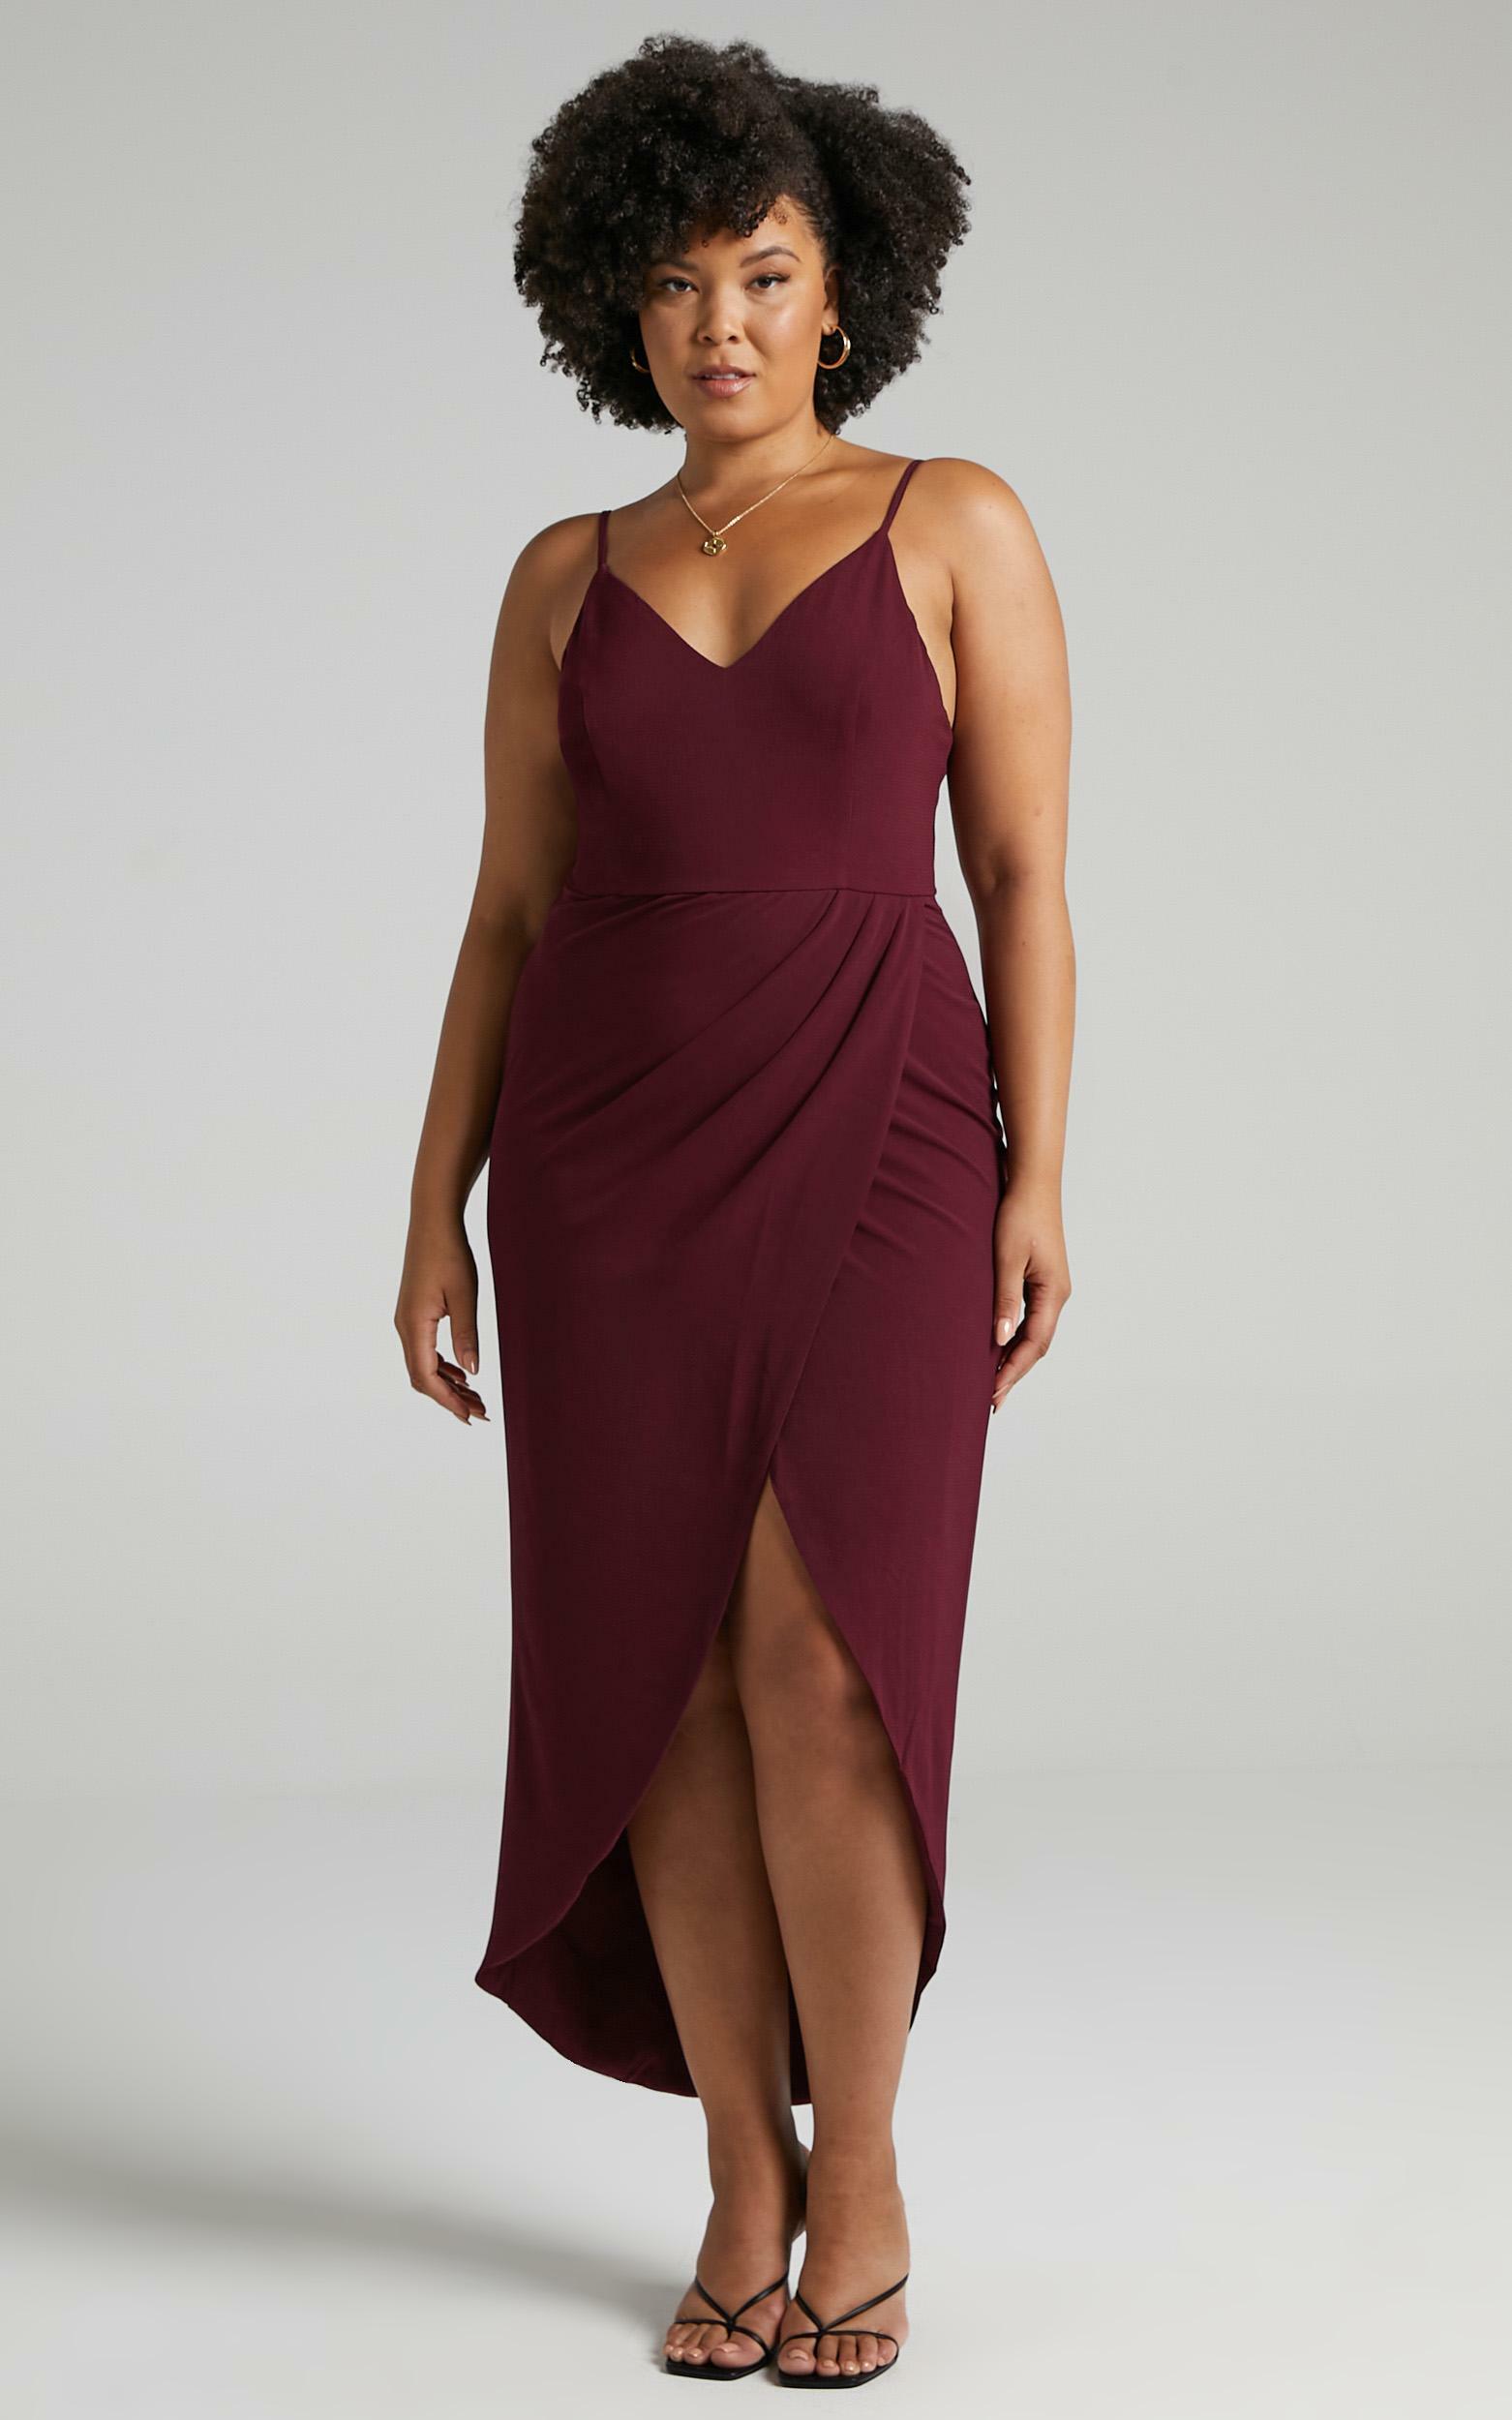 Lucky Day High Low Maxi Dress In Wine | Showpo